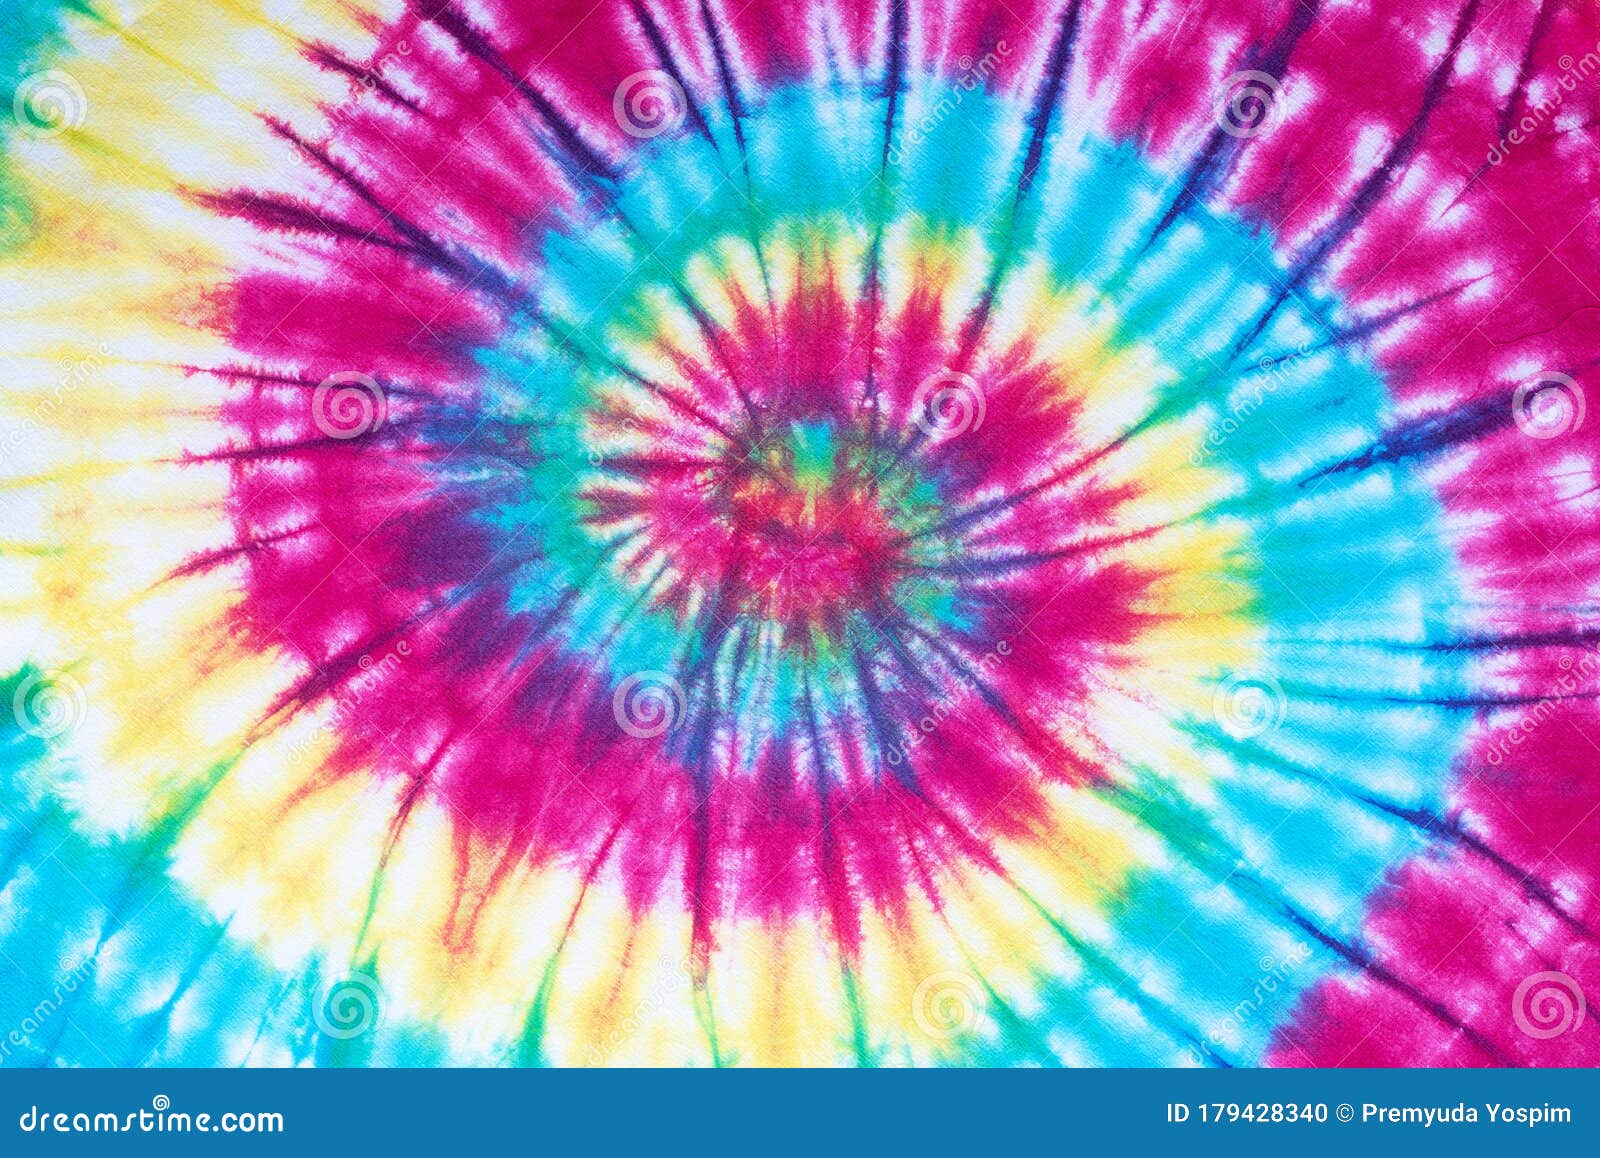 Tie Dye Pattern Abstract Texture Background Stock Photo - Image of